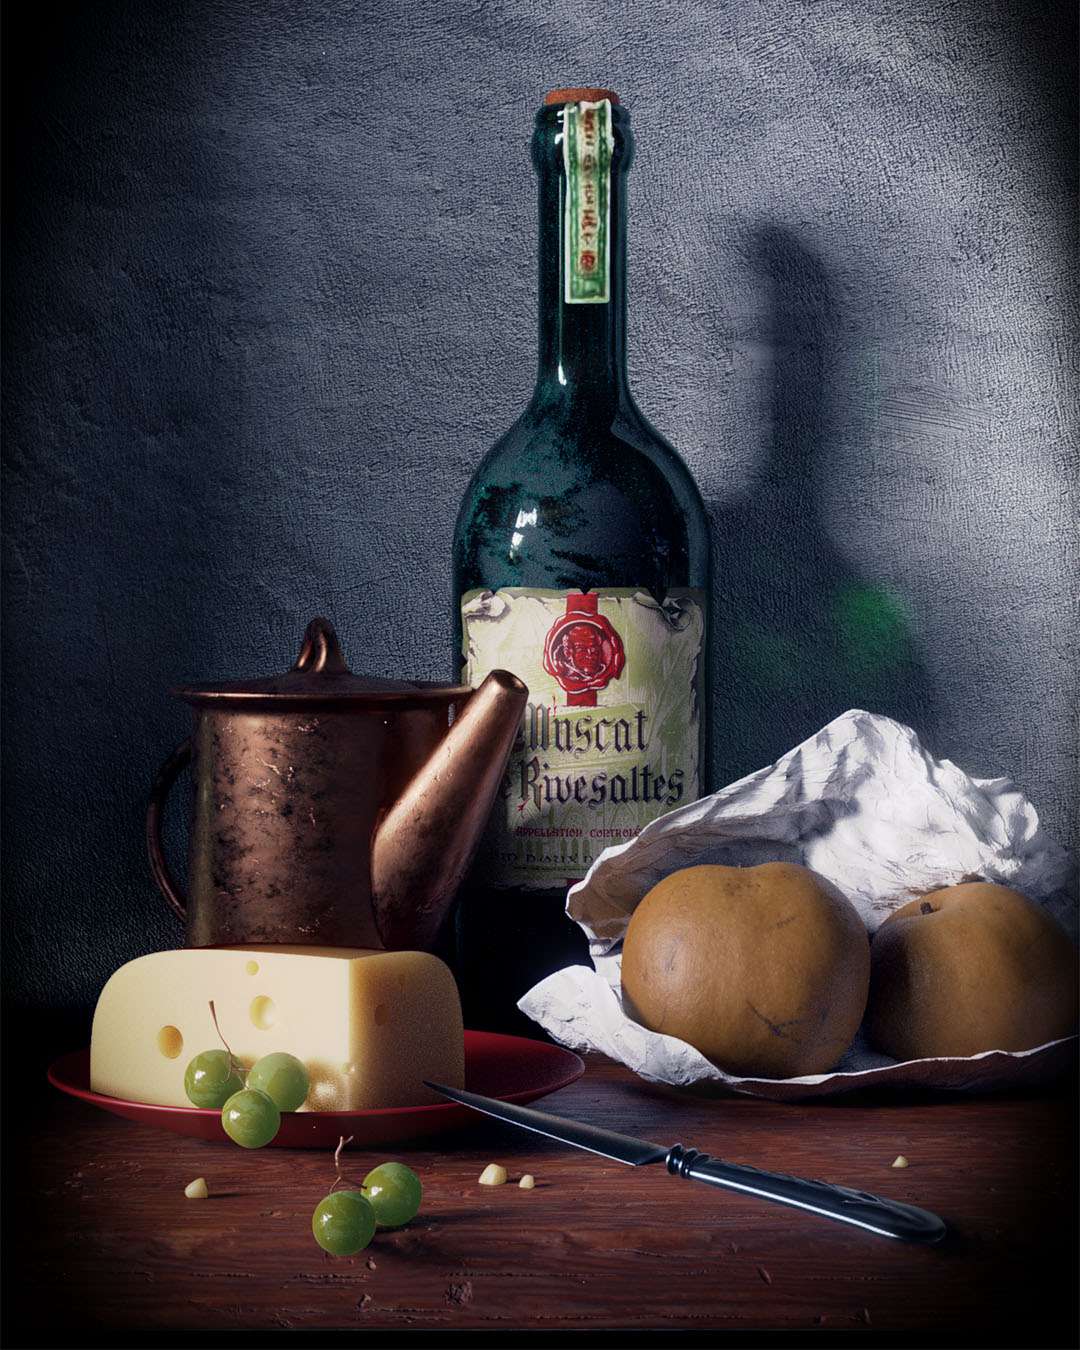 A still life rendering depicting cheese, wine, a brass pot, and pears placed on a rustic wooden table.